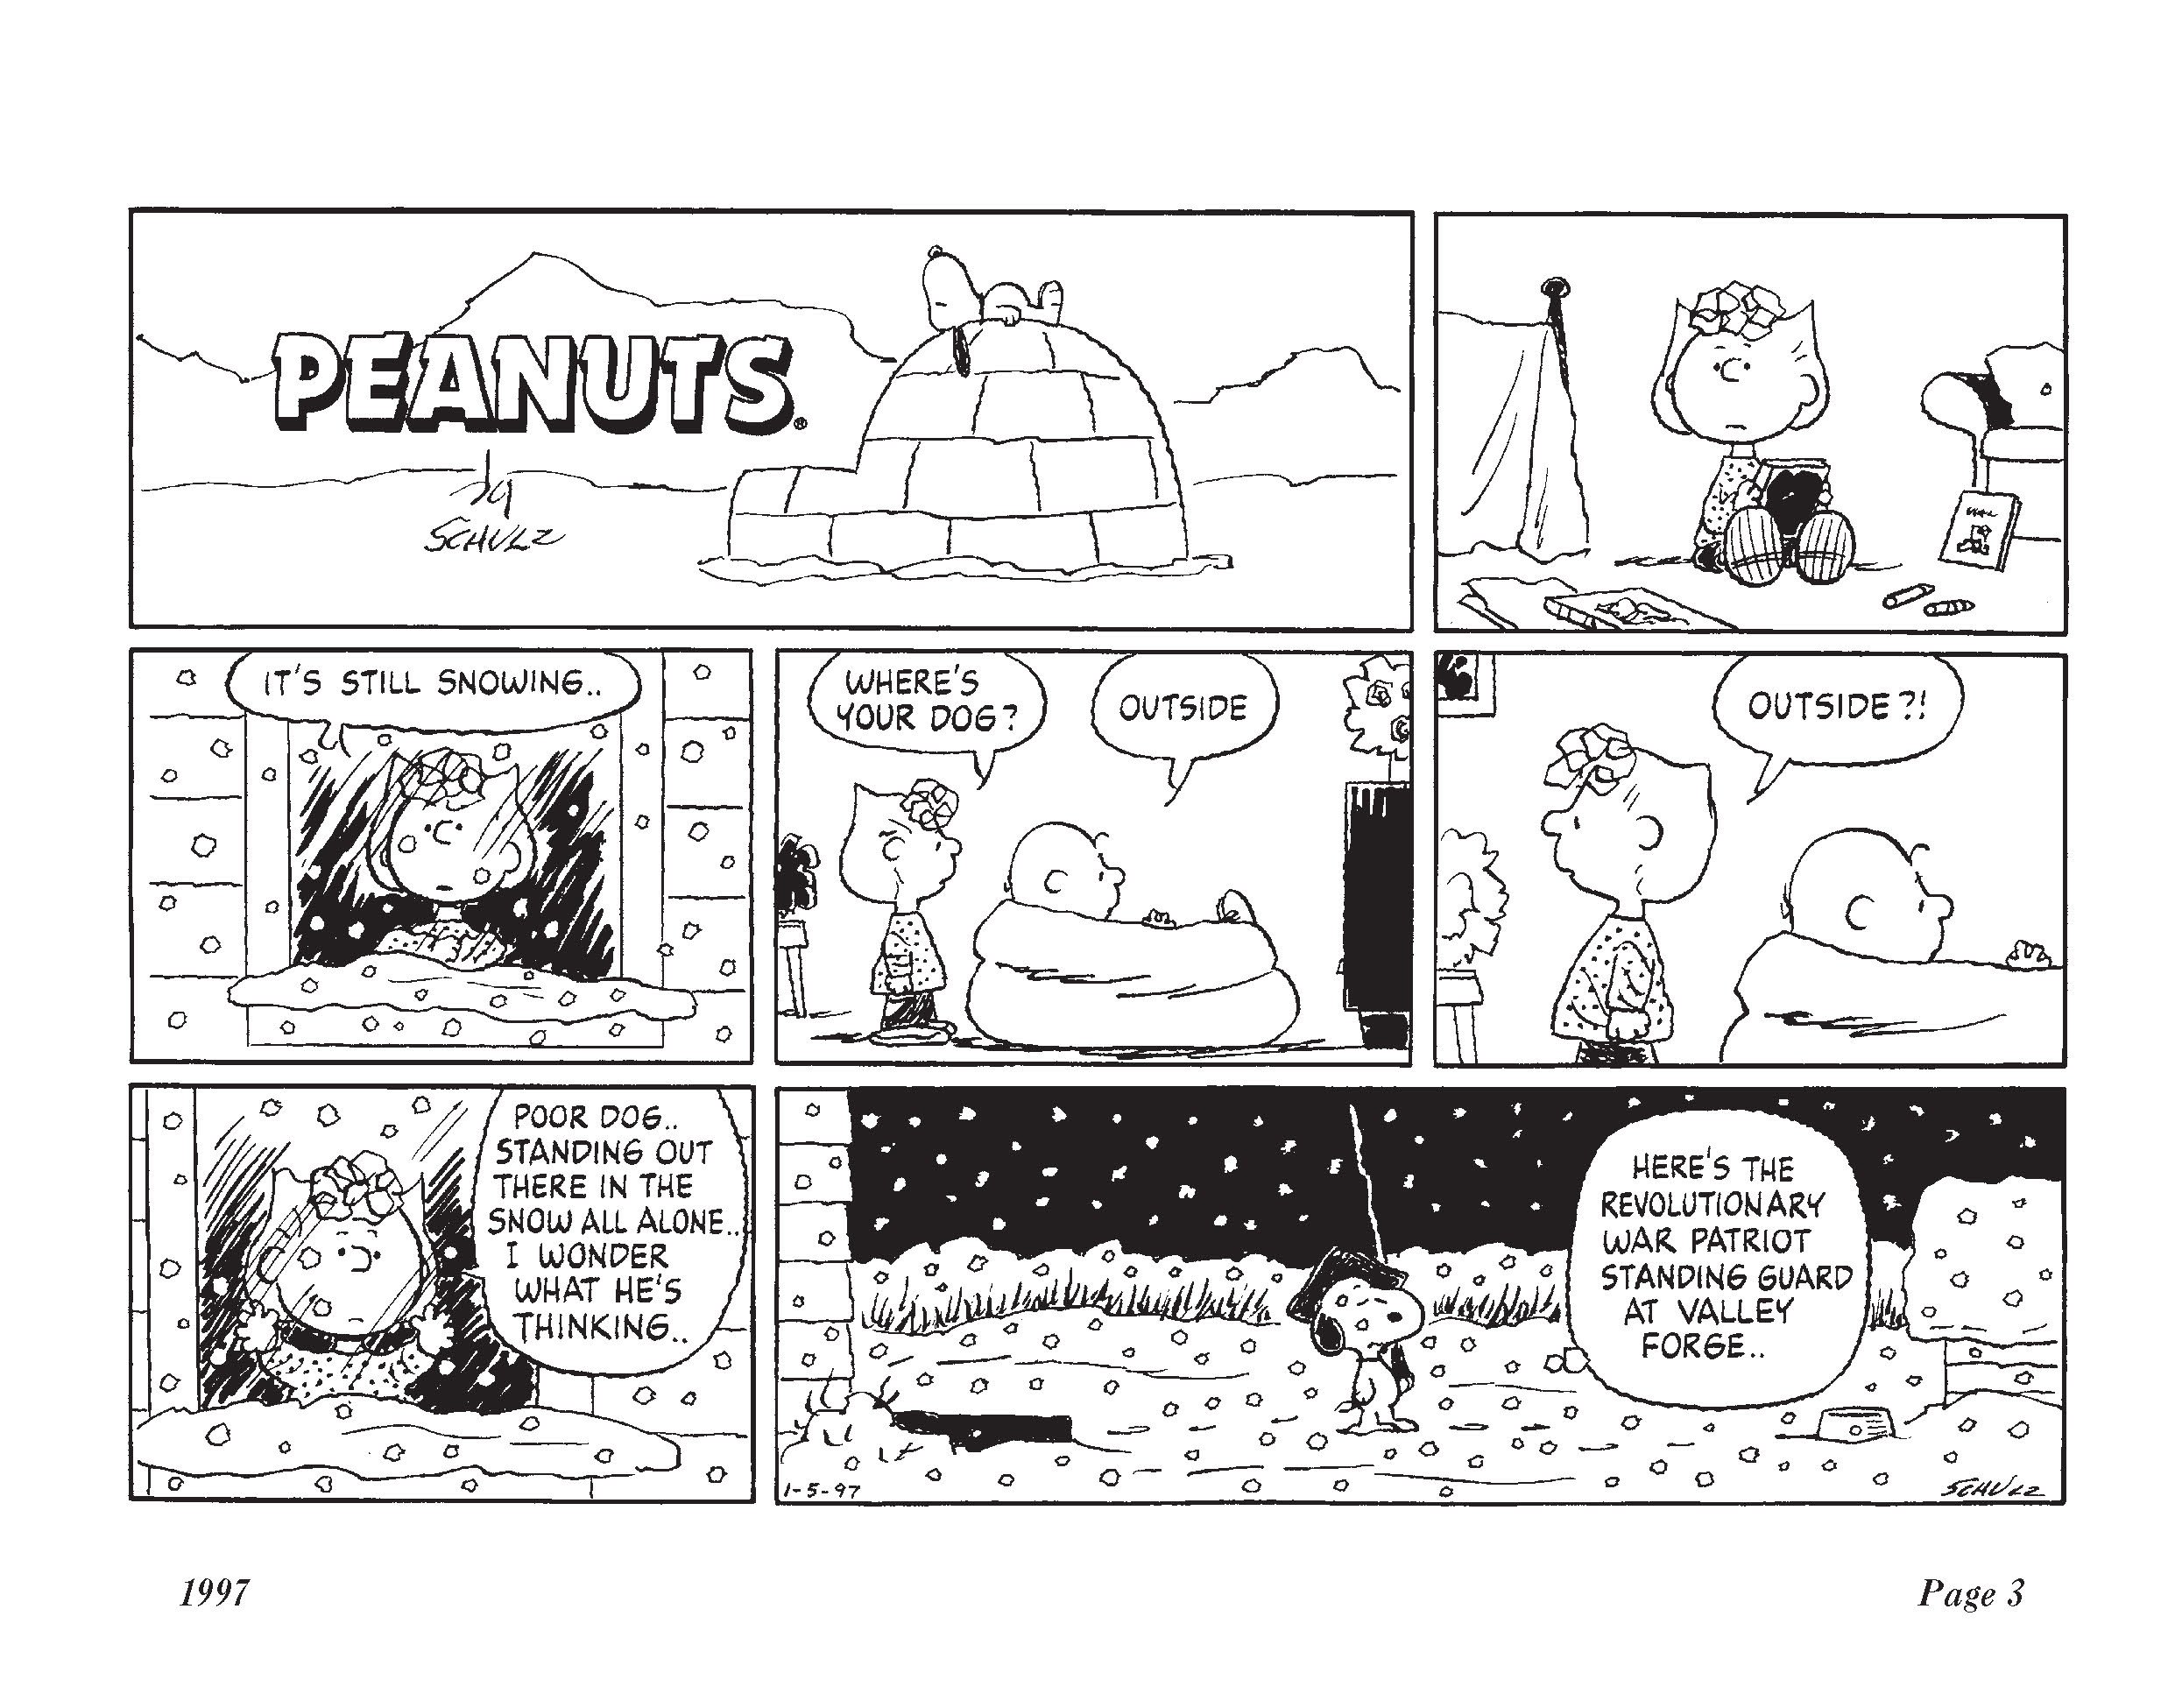 The Complete Peanuts 1995-1998 Gift Box Set (Vol. 23 & 24) (The Complete Peanuts)